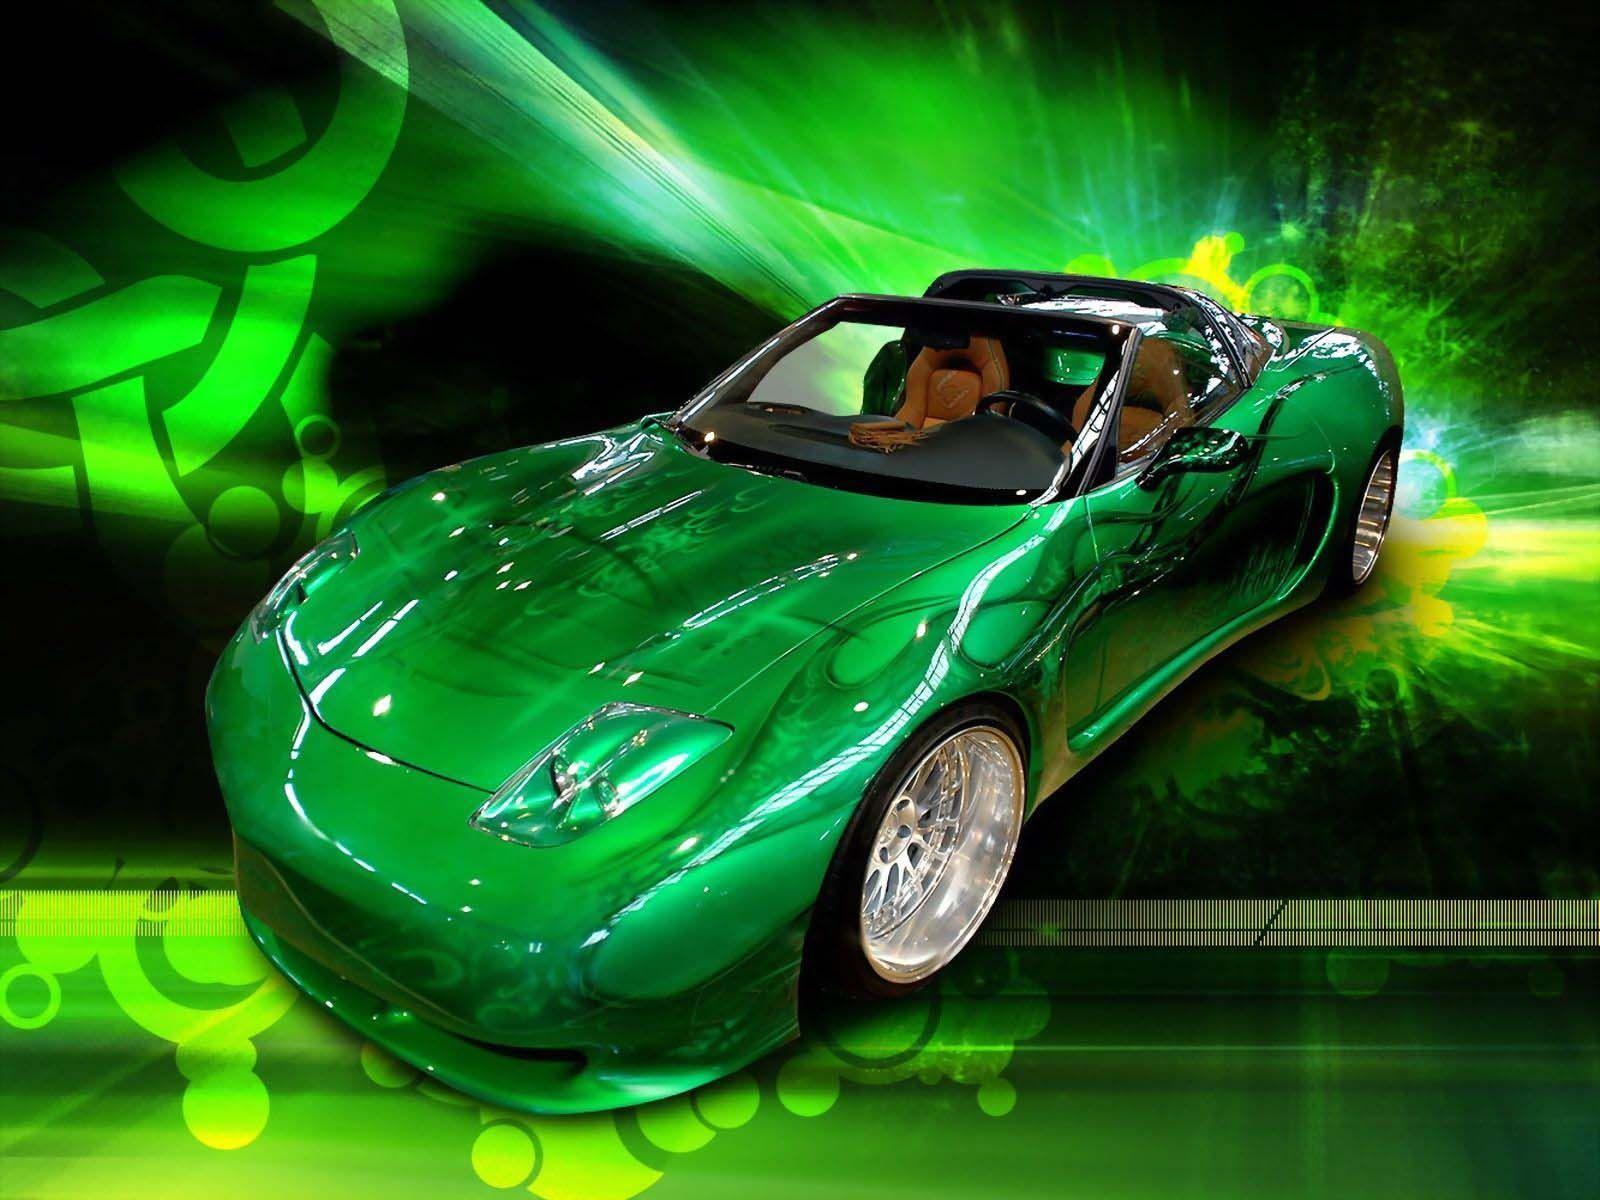 Amazing Green Fantasy Car. HD Other Cars Wallpaper for Mobile